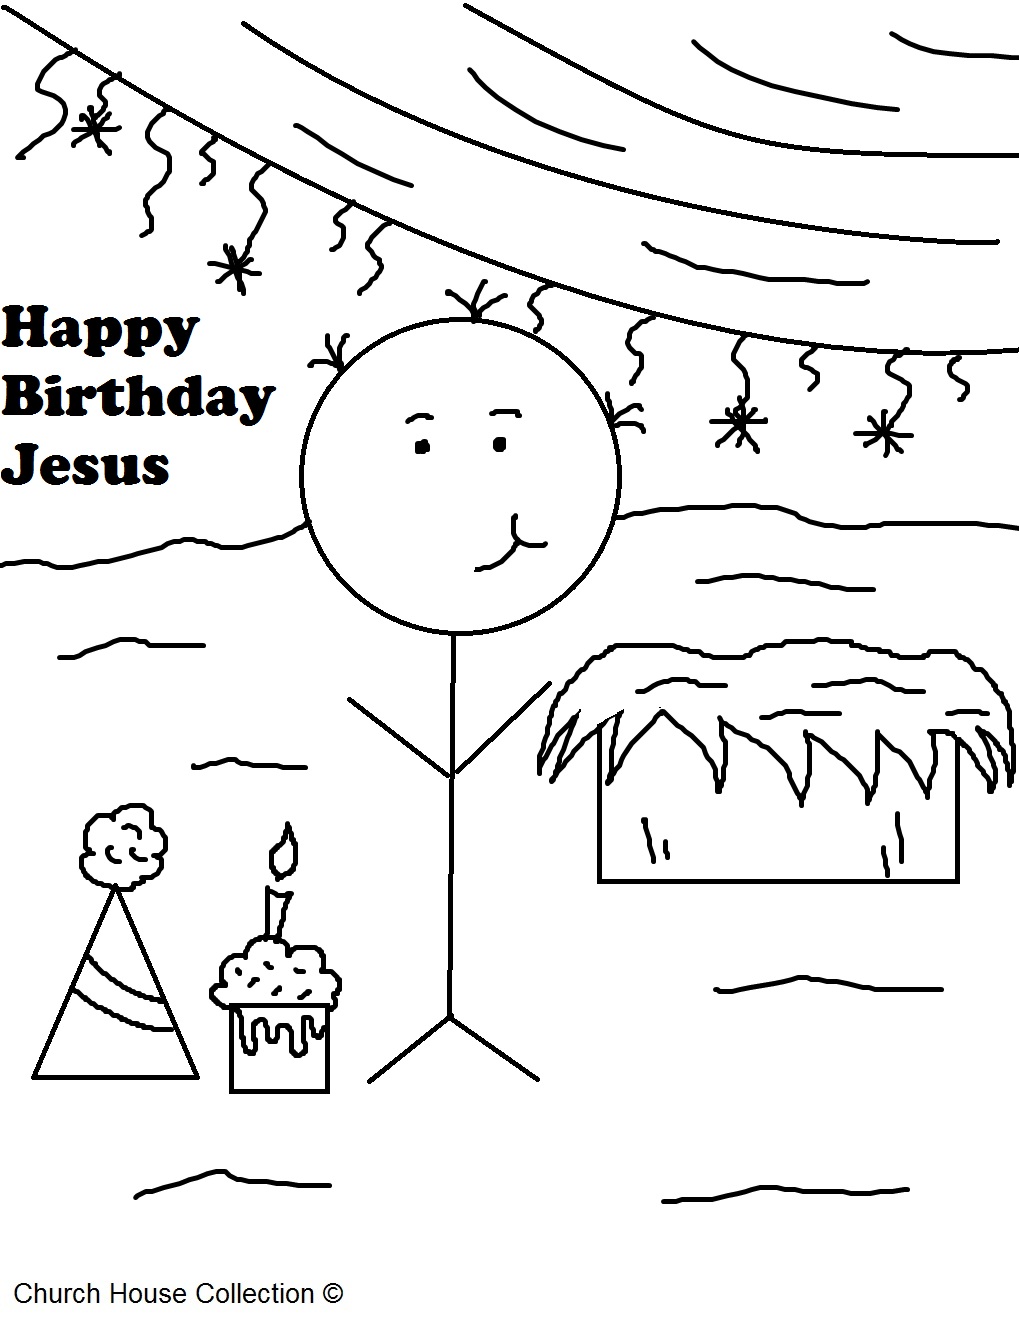 Free Christmas "Happy Birthday Jesus" Coloring Pages For Kids in Sunday School or Children's Church by Church House Collection